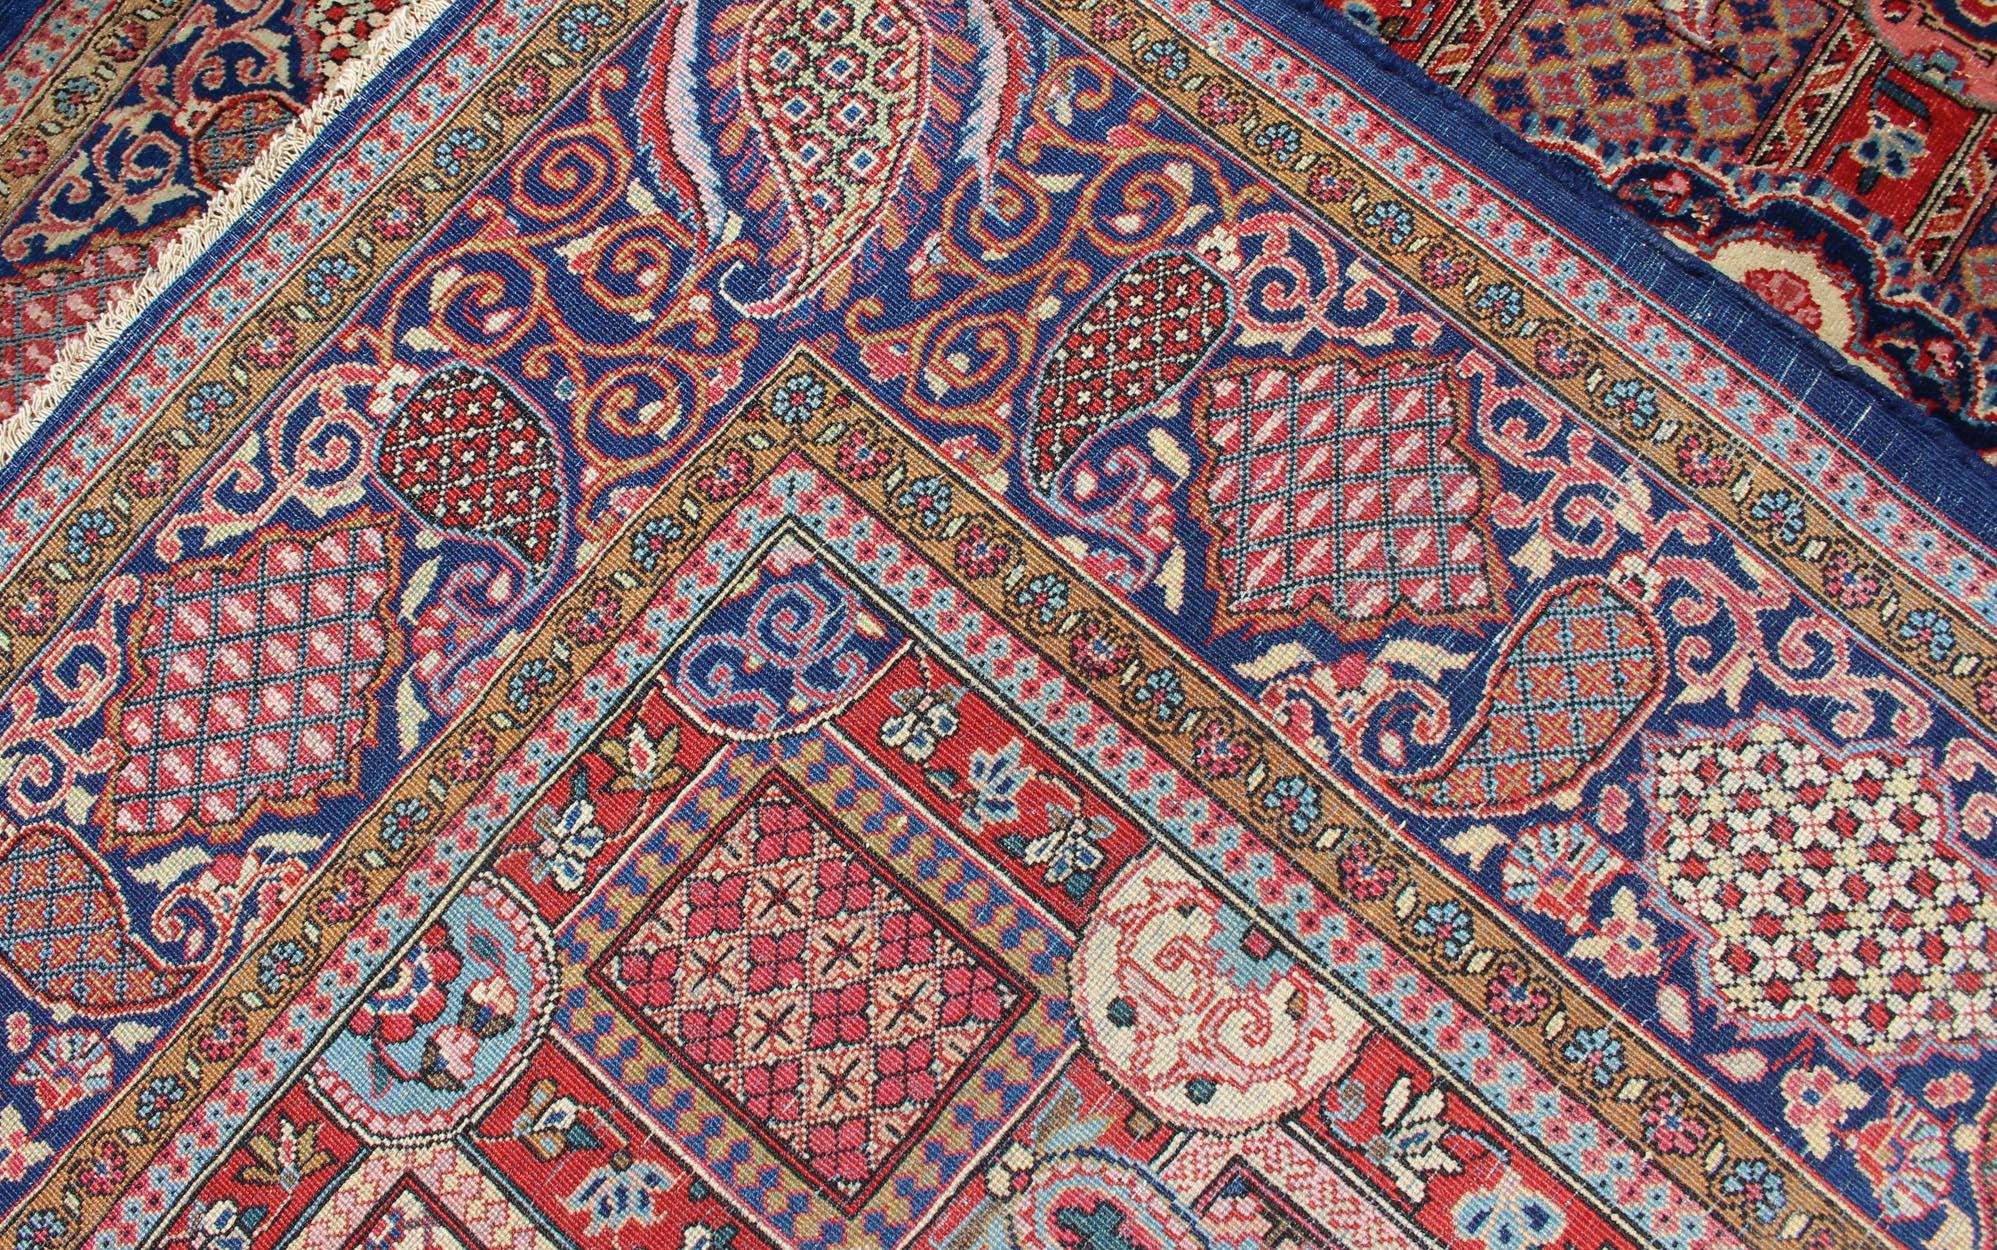 Early 20th Century Antique Fine Kashan Persian Rug with an Unusual and Unique Design For Sale